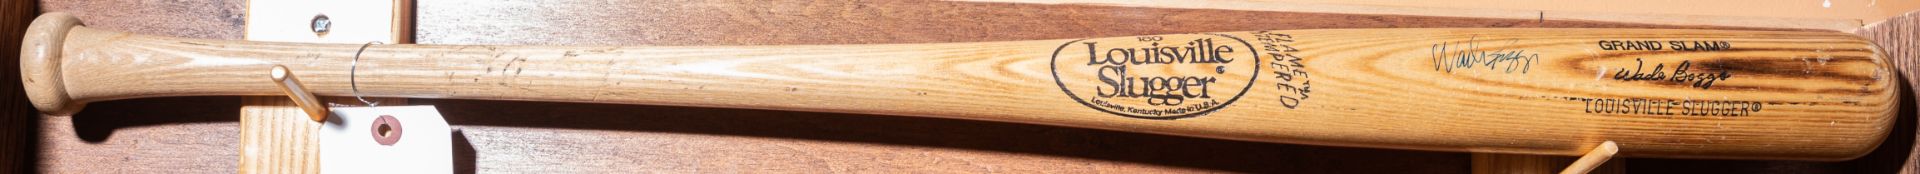 Autographed Louisville Slugger Wood Baseball Bat Stamped and Signed "Wade Boggs"